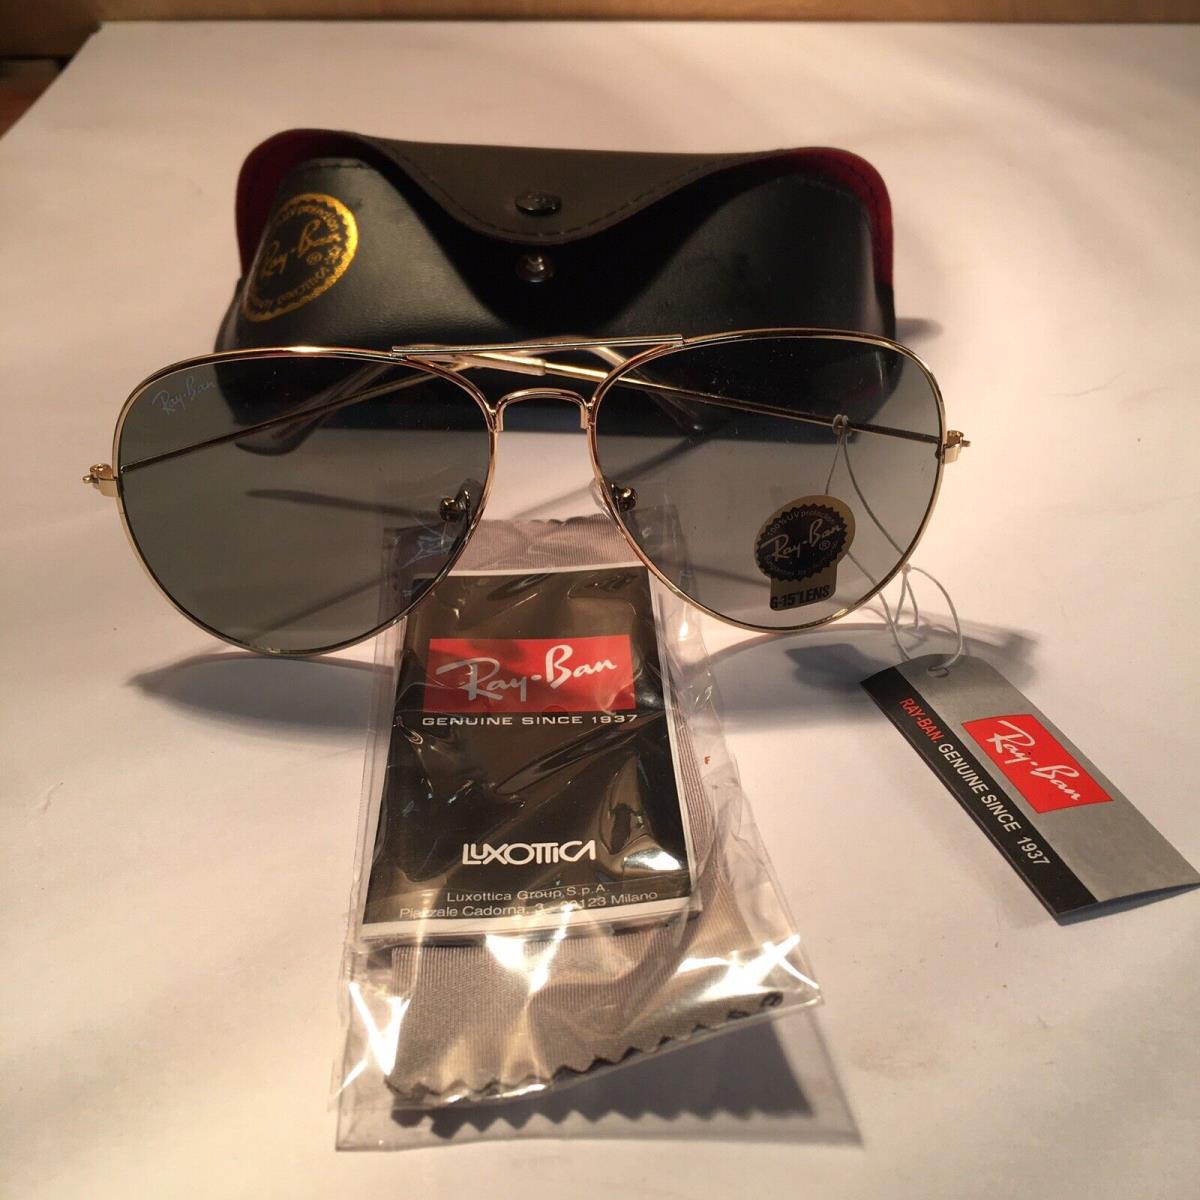 Ray-ban Ray Ban Aviator Sunglasses Luxottica Case Italy Lei Peng Gold Frame  G-15 - Ray-Ban sunglasses - 001404867800 | Fash Brands